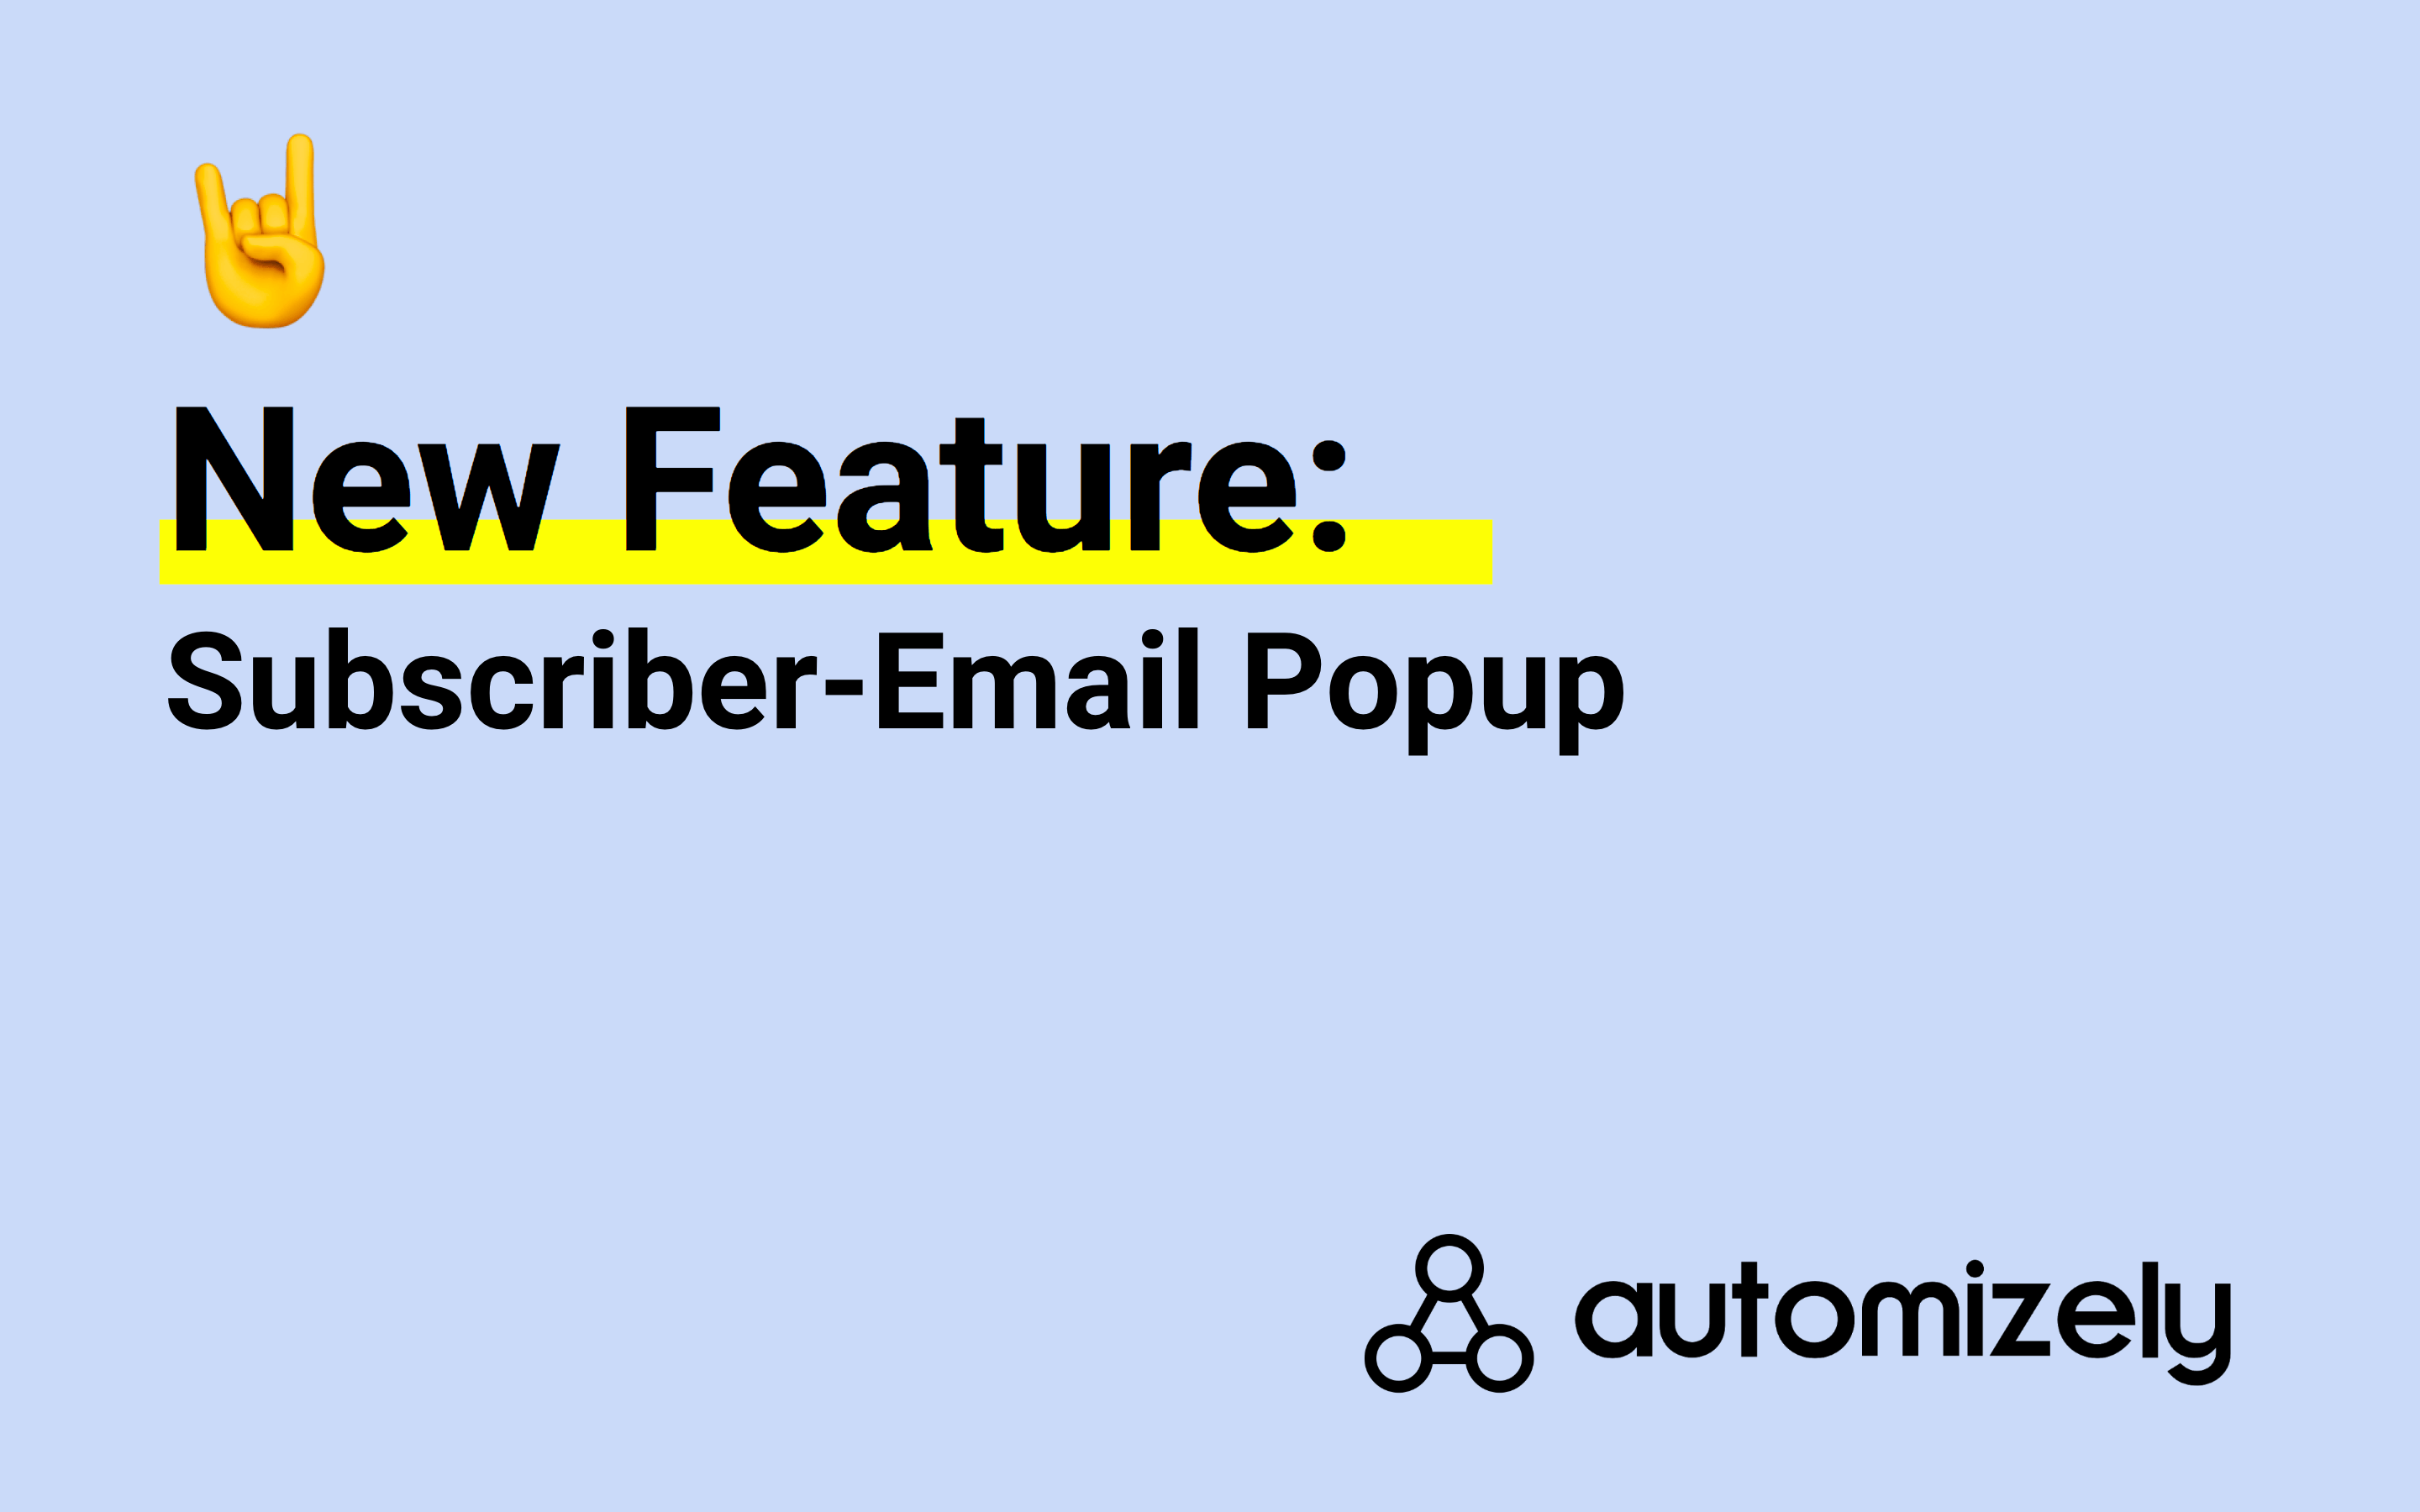 New feature: Subscriber-Email Popup